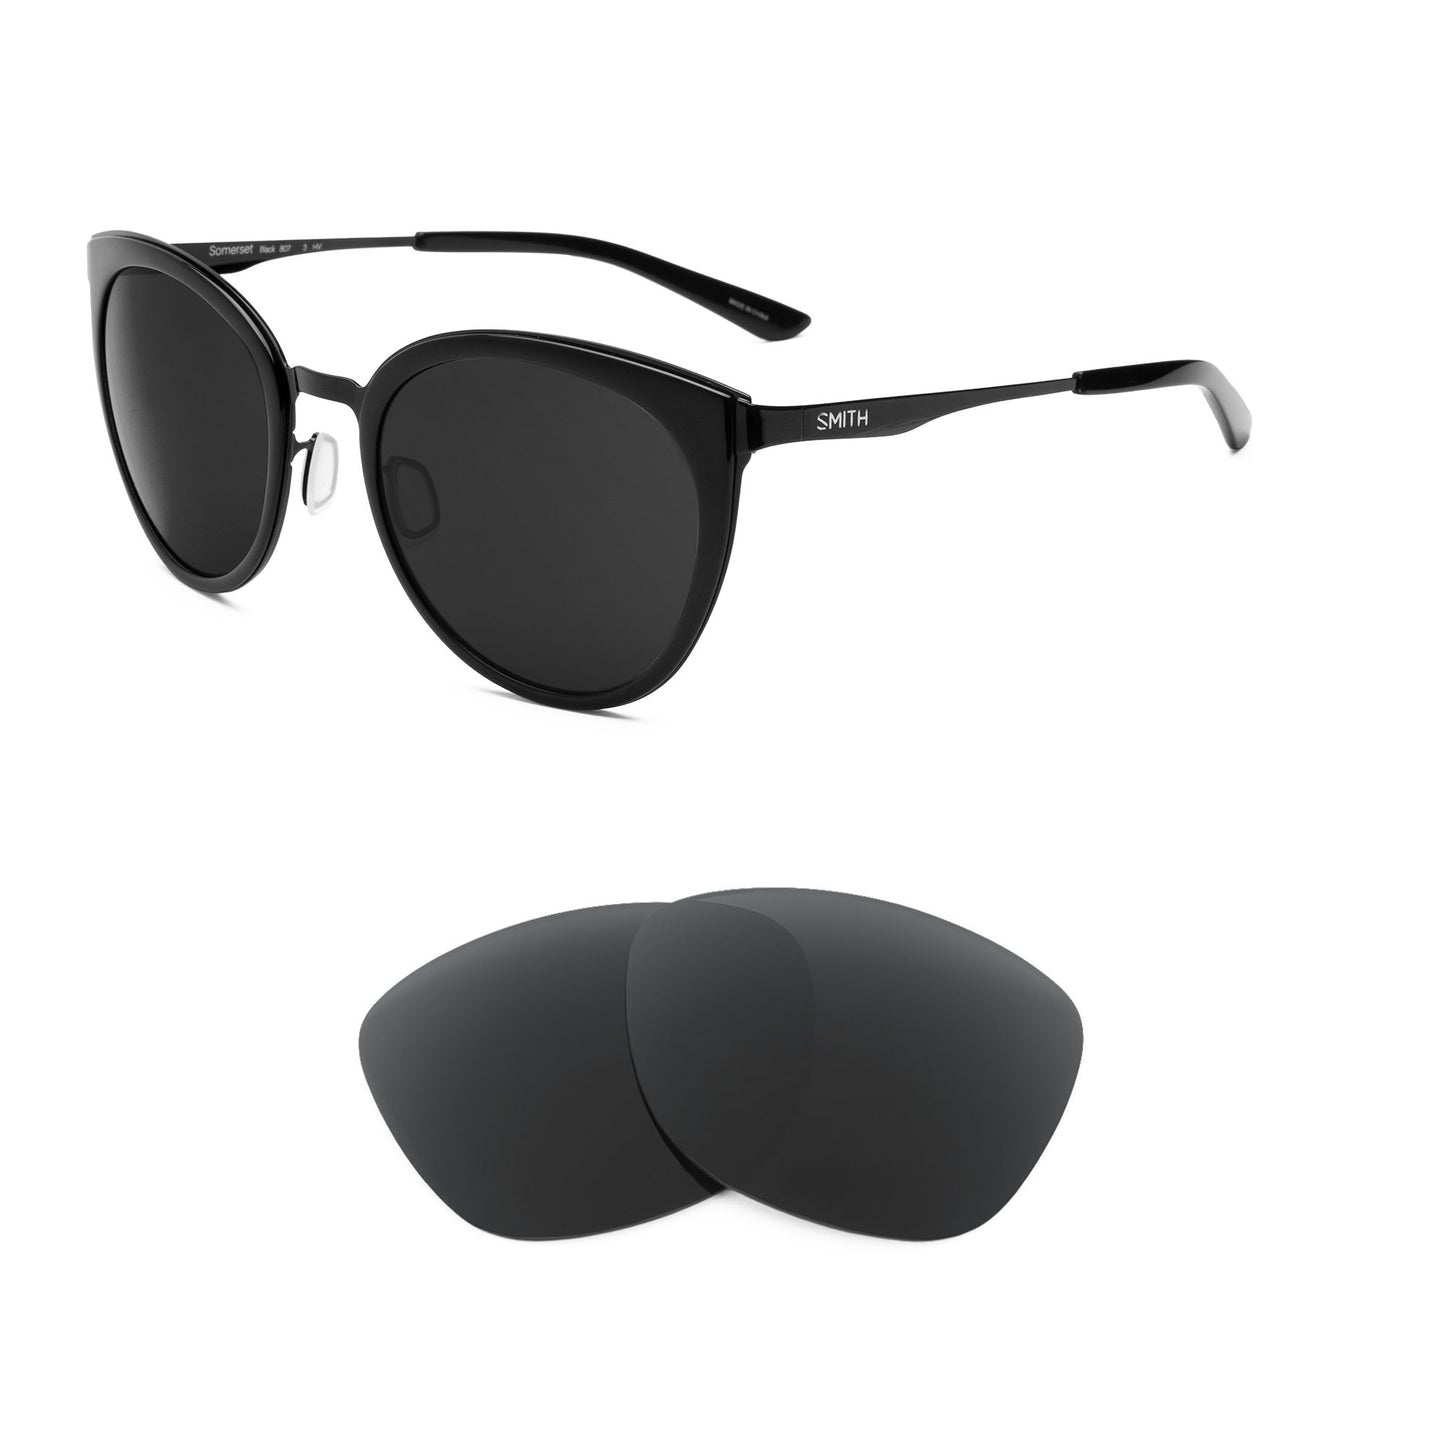 Smith Somerset sunglasses with replacement lenses